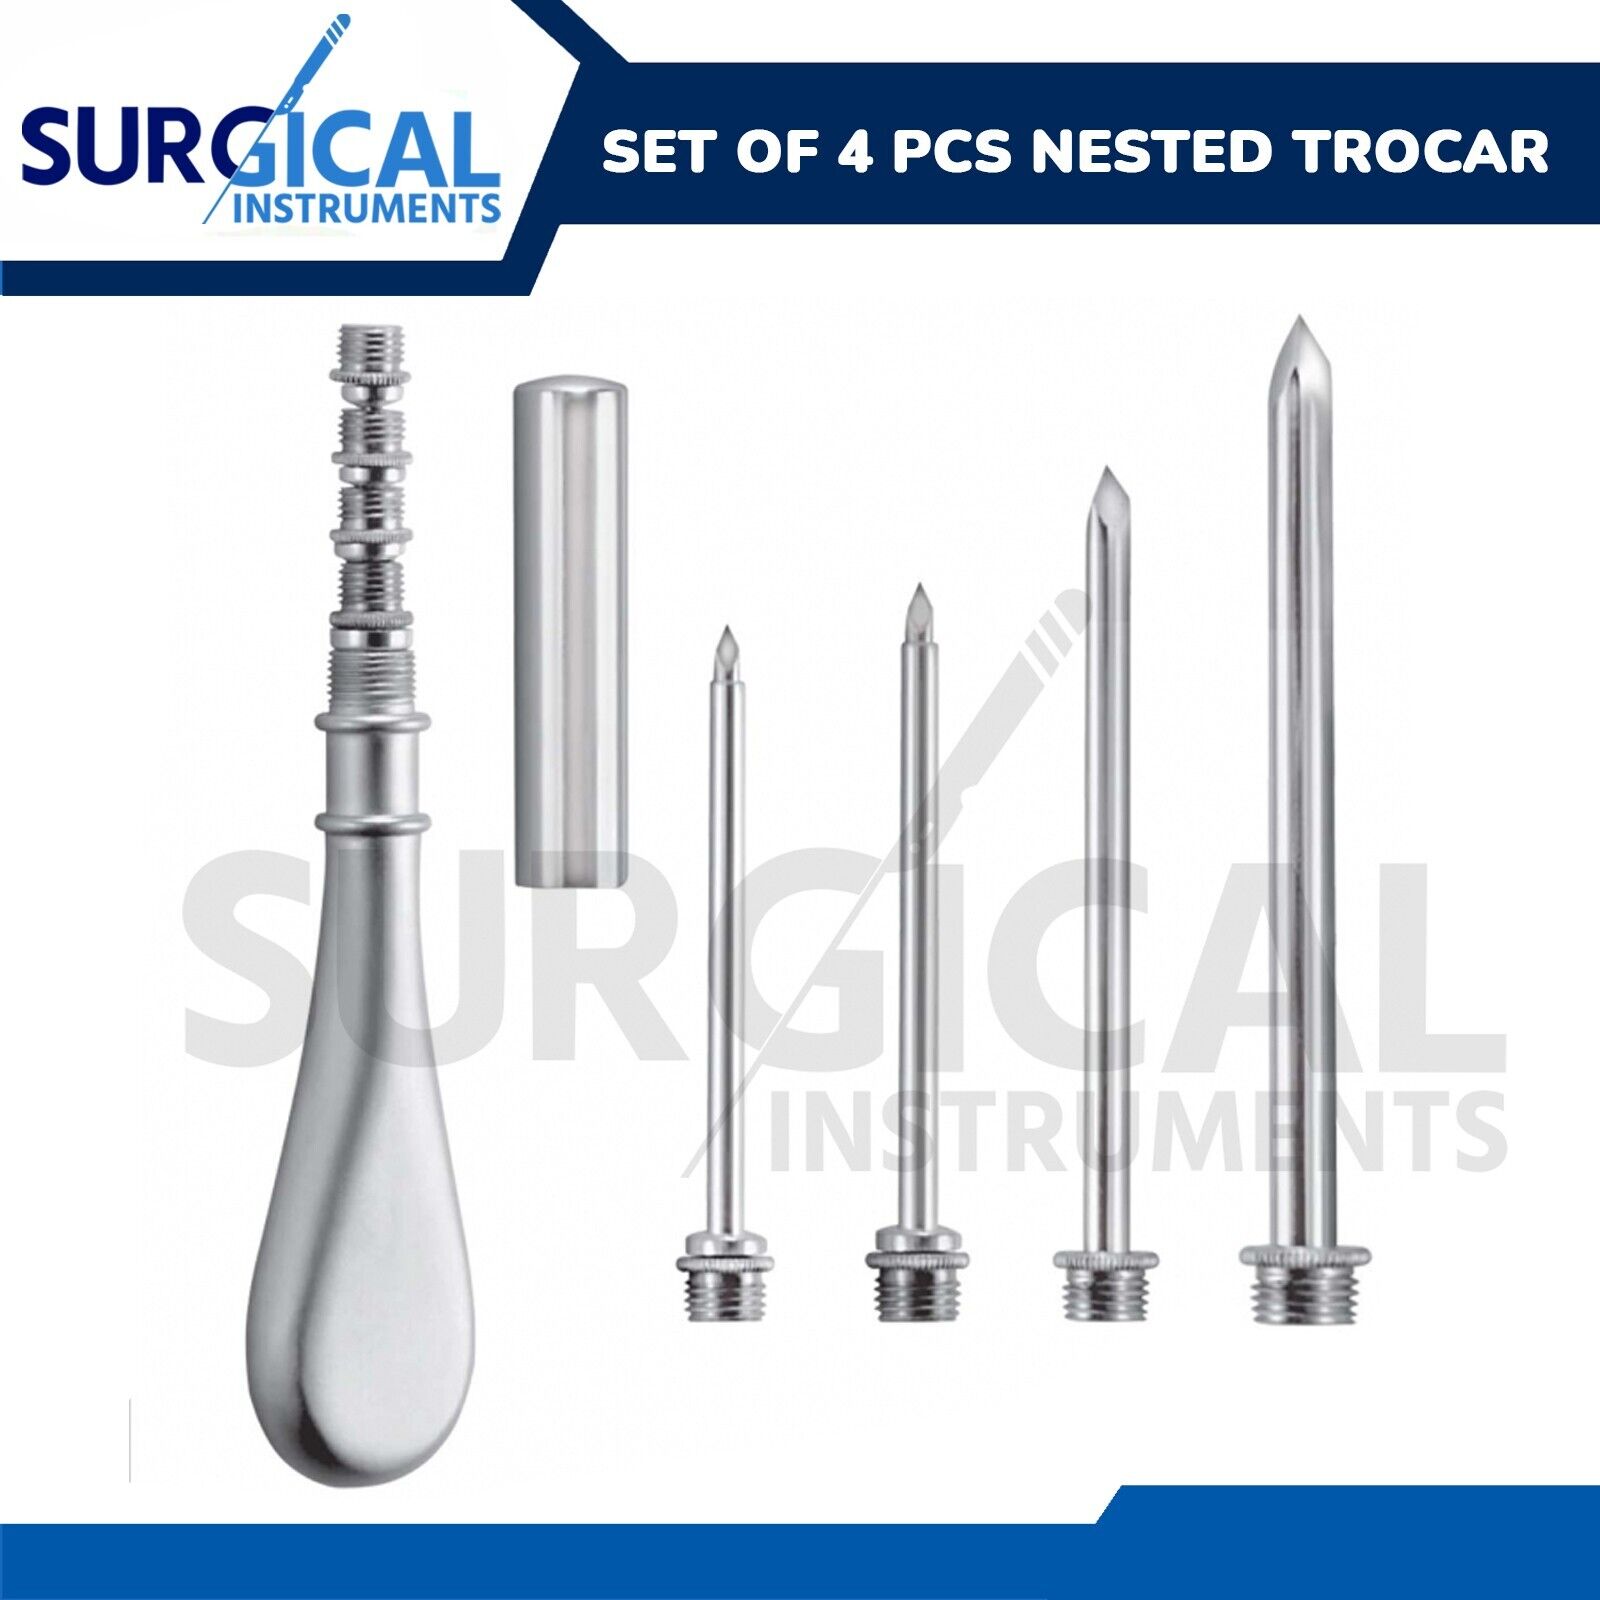 Set of 4 Pcs NESTED Trocar Medical Surgical Instruments Stainless German Grade